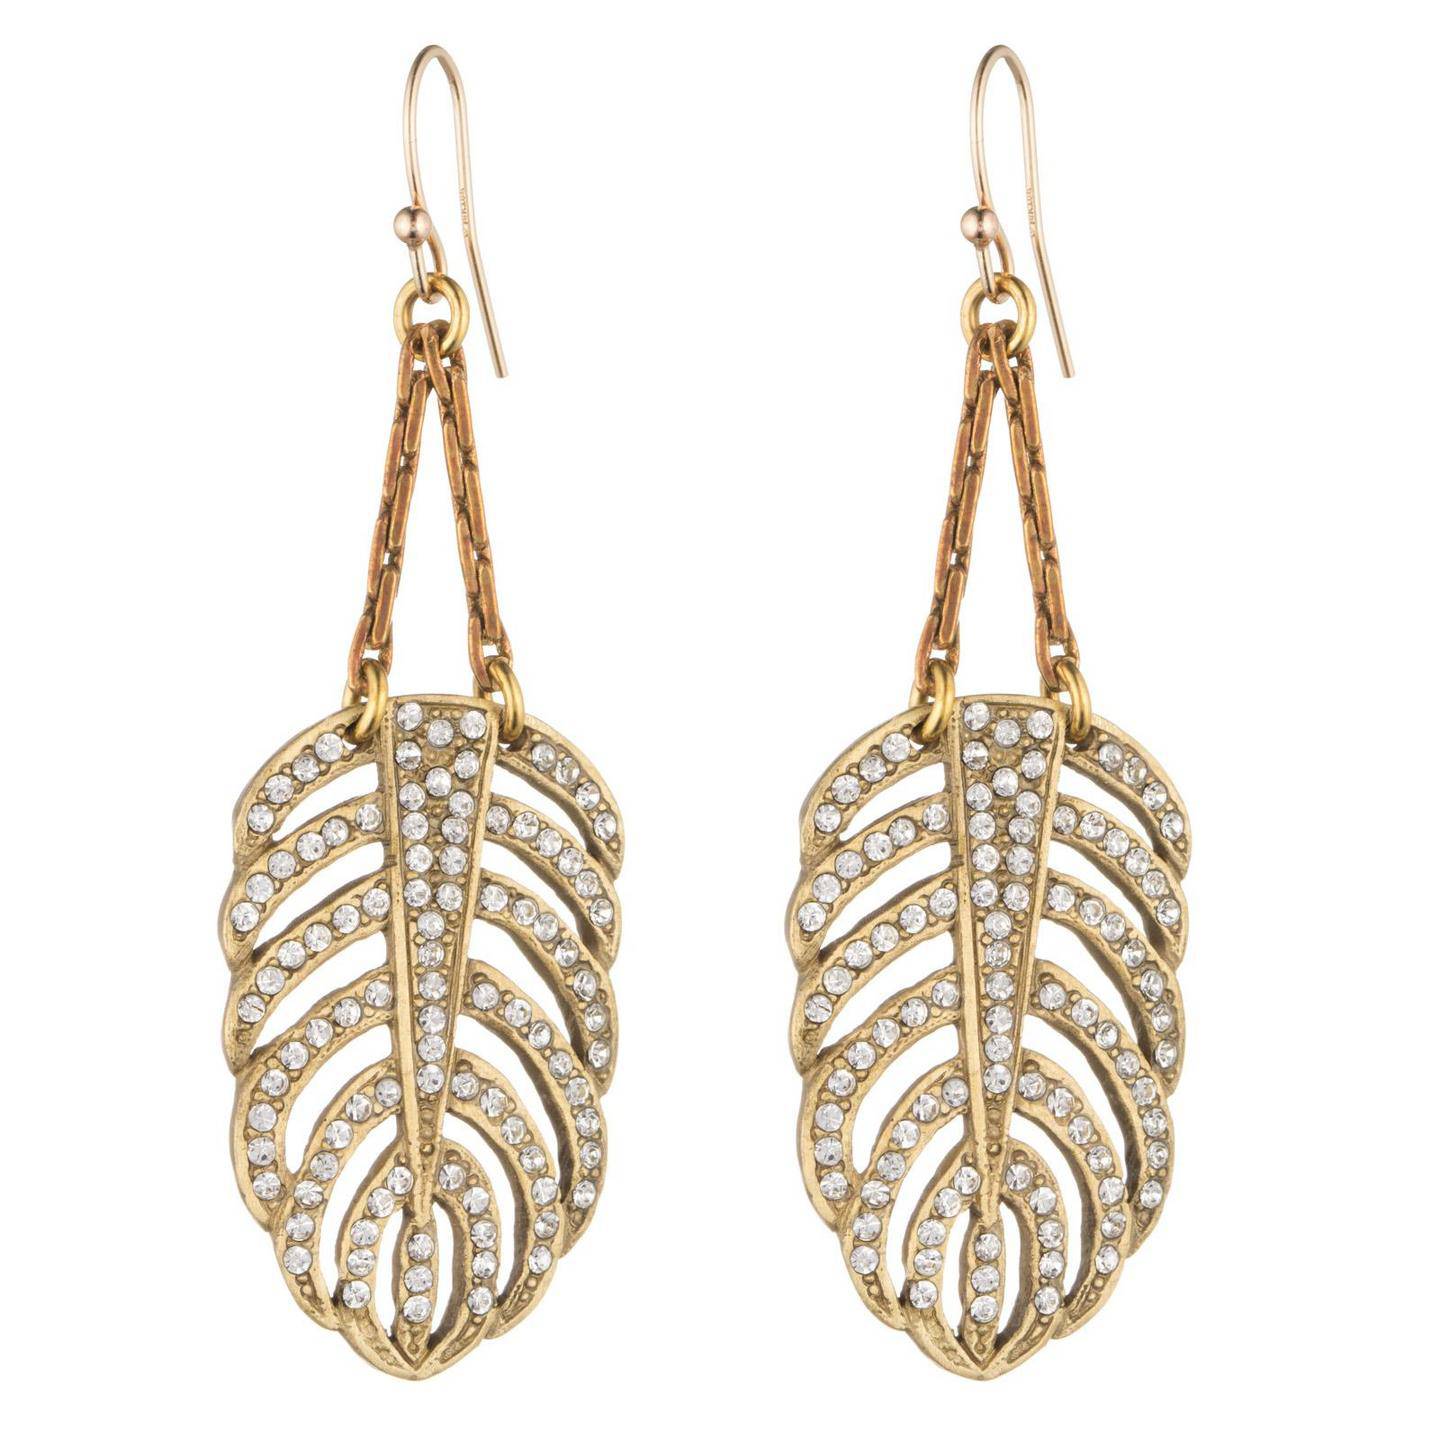 Why the chandelier earring trend is still hanging in there – The Irish ...